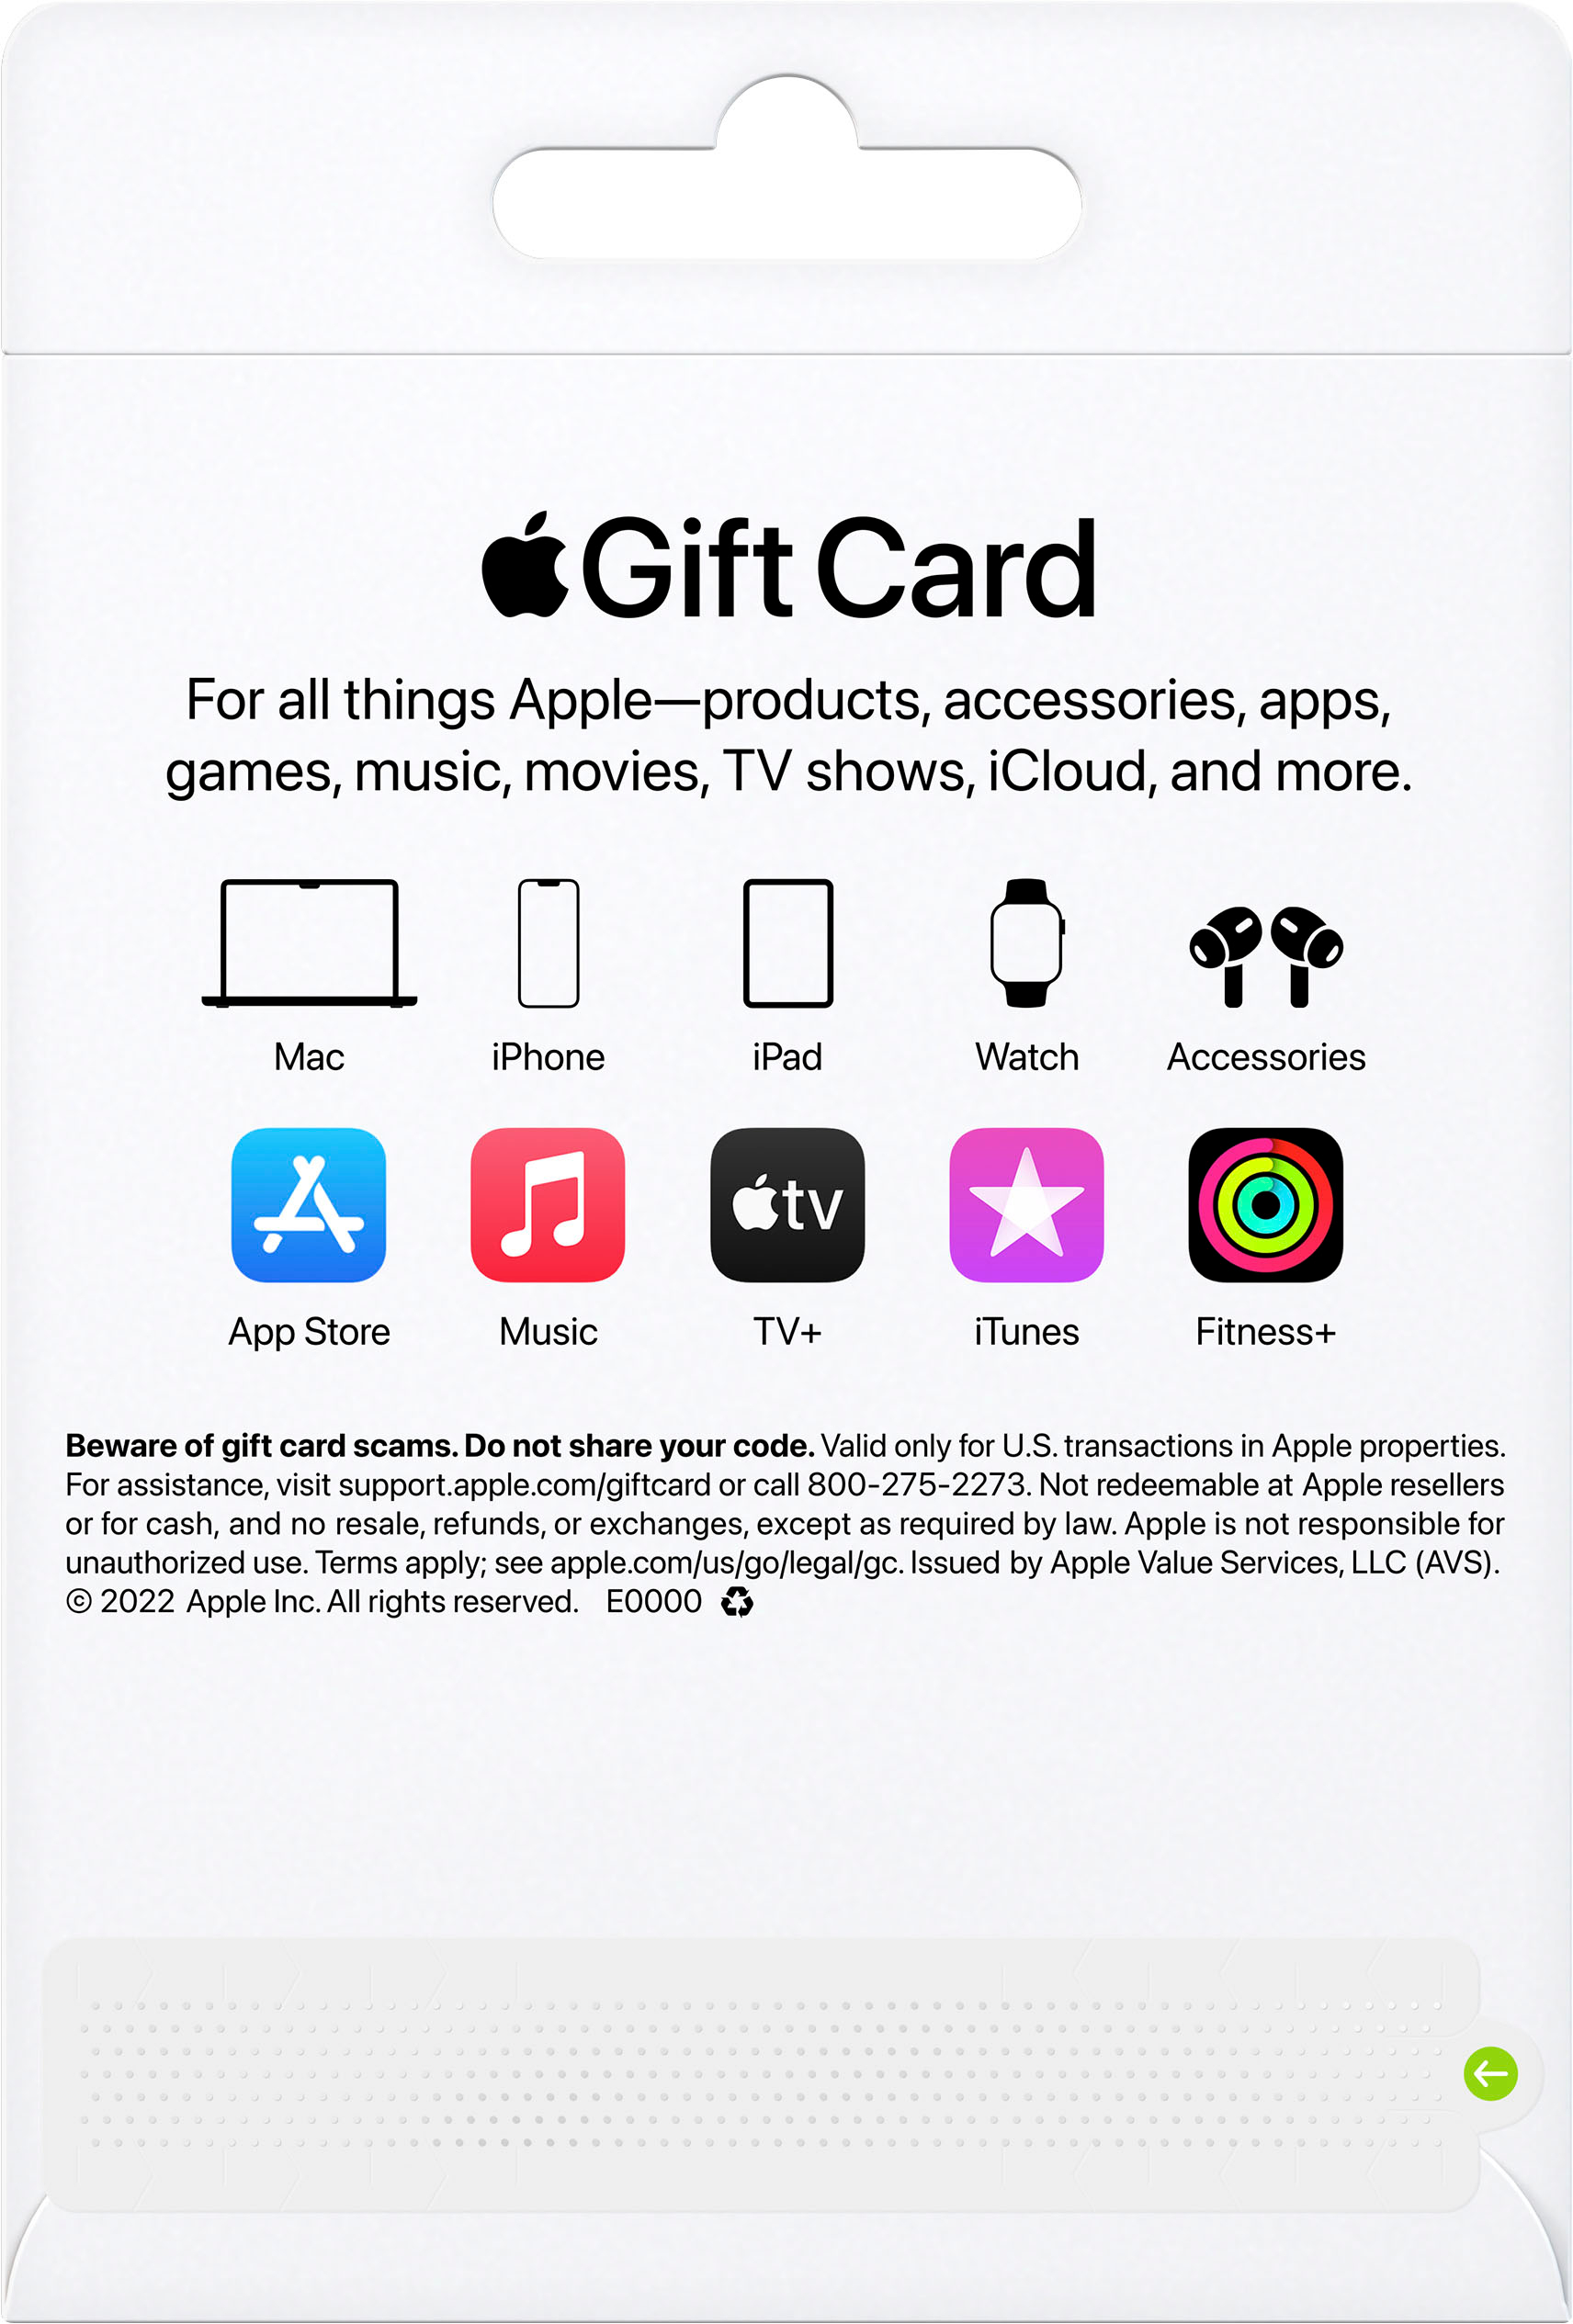 Something Special For You: Your $100 Apple Gift Card